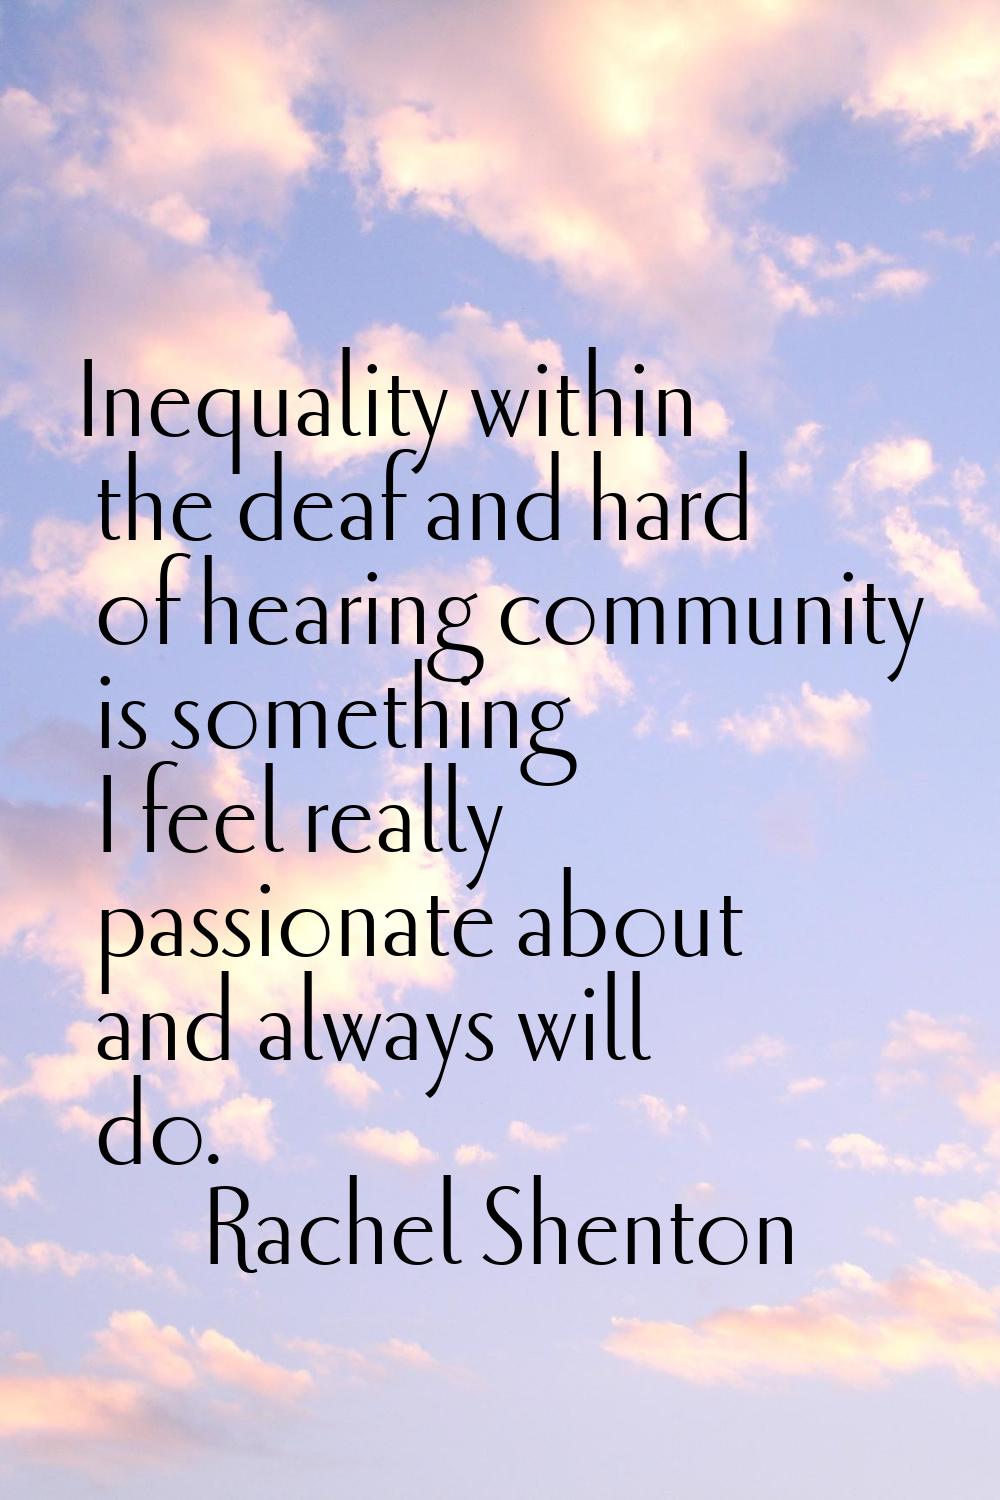 Inequality within the deaf and hard of hearing community is something I feel really passionate abou